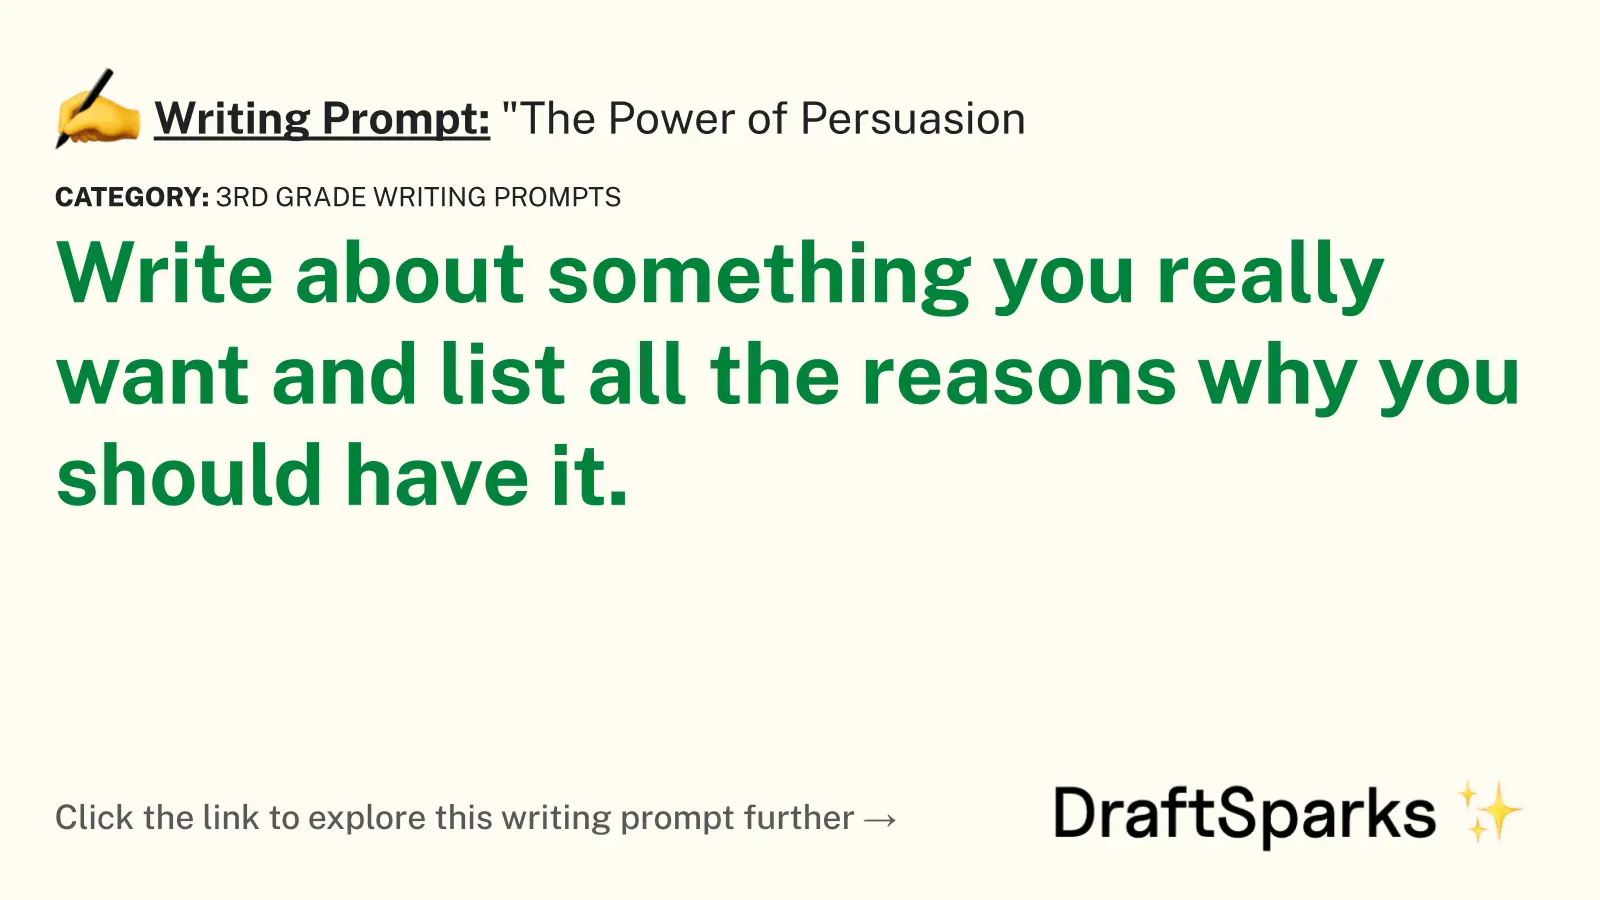 “The Power of Persuasion